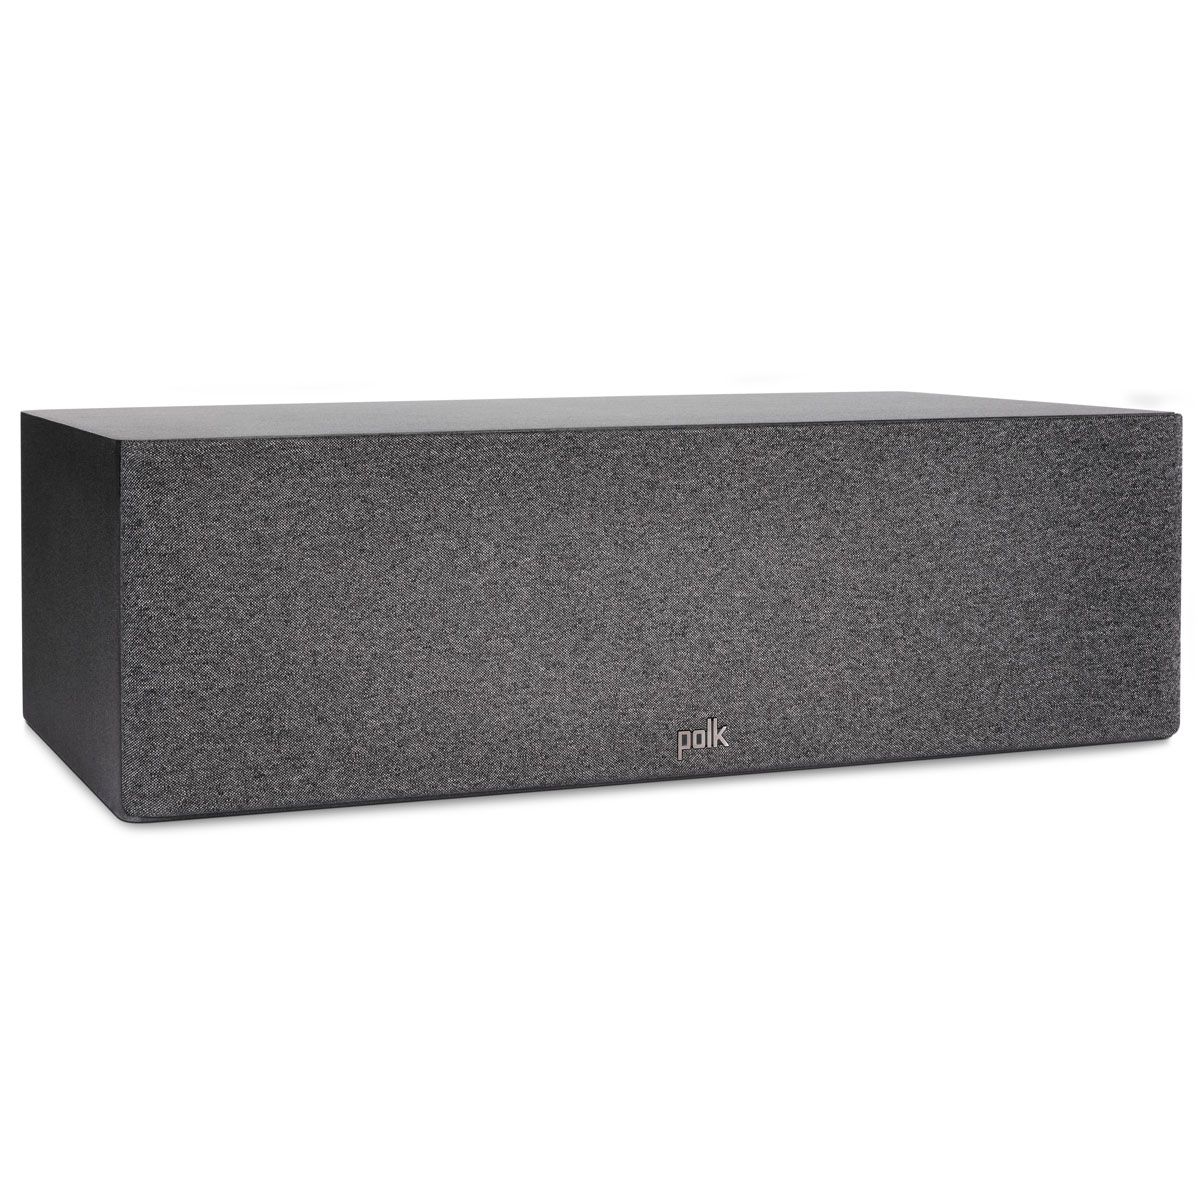 Polk Reserve R400 Center Channel Speaker, Black, front right angle with grille